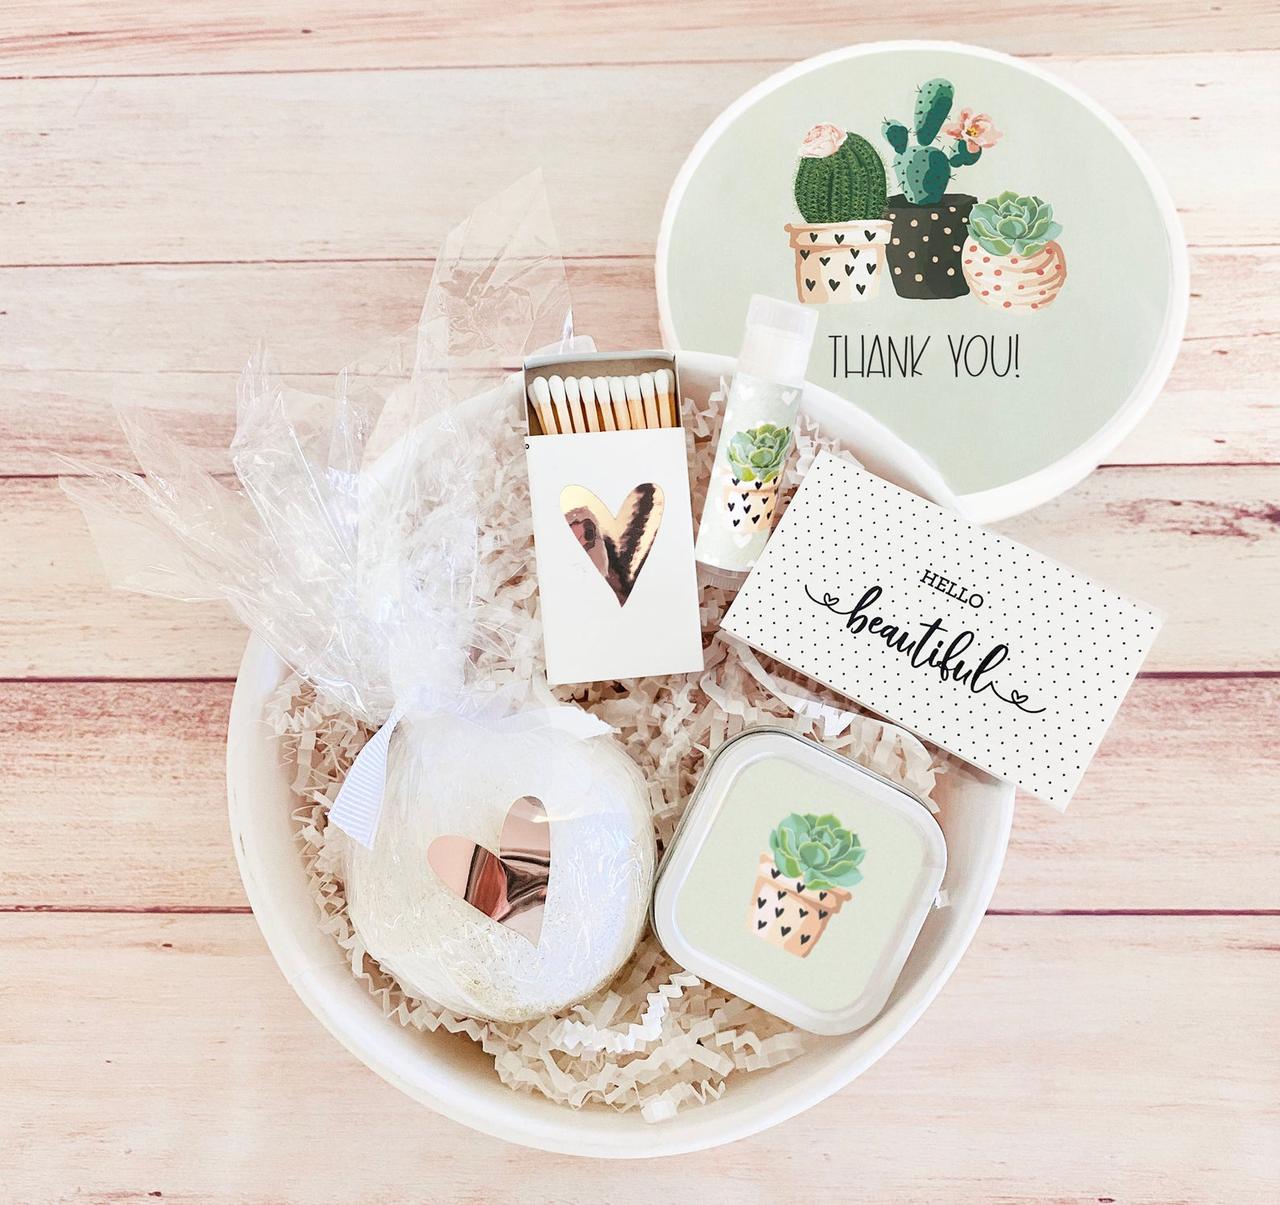 Bridal Shower Favor Ideas That You Can DIY